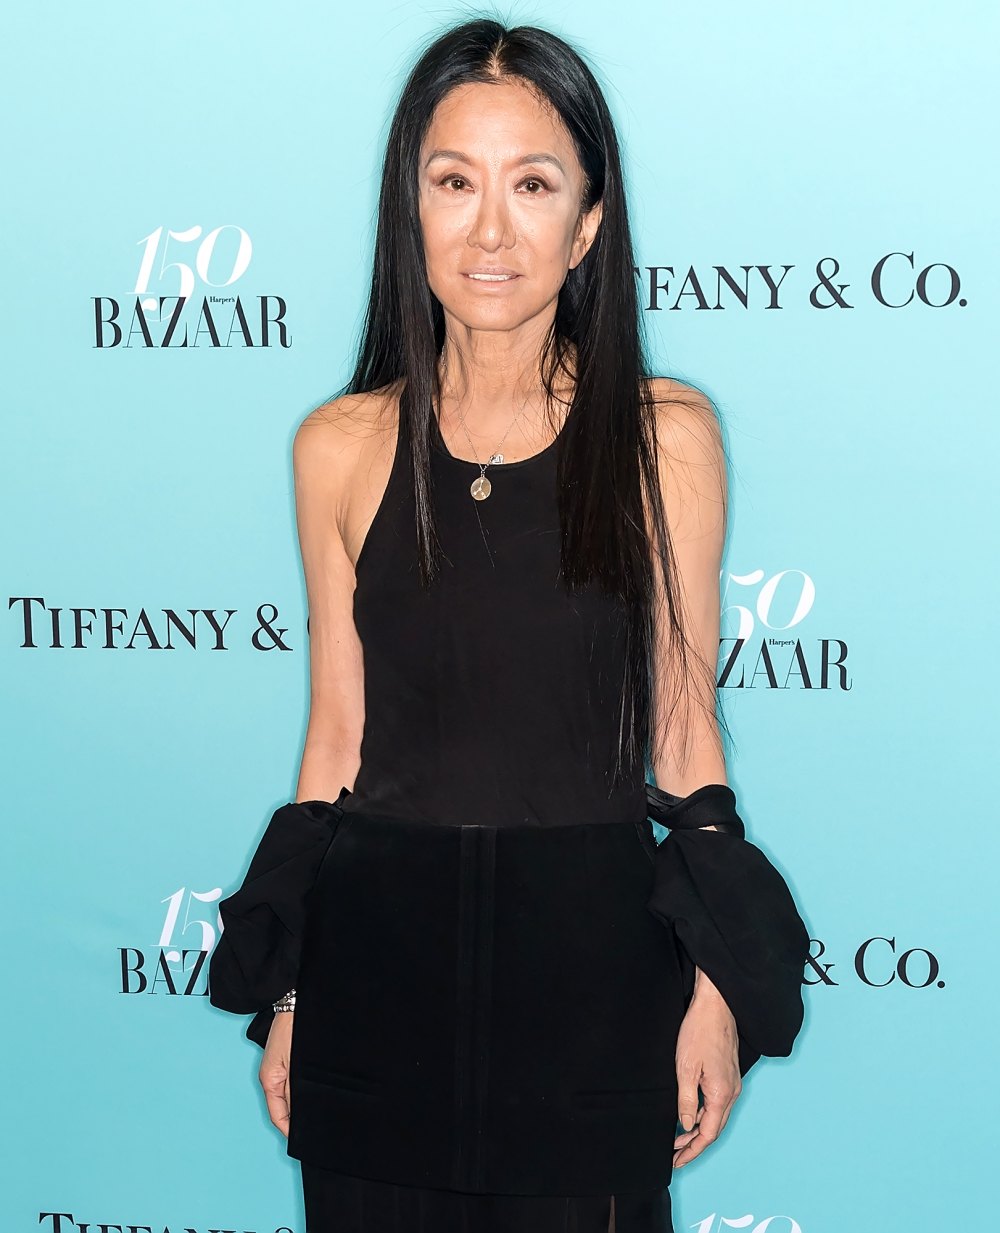 Vera Wang Credits A Surprising Mix of McDonalds, Vodka and Dunkin’ Donuts For Maintaining Her Youth